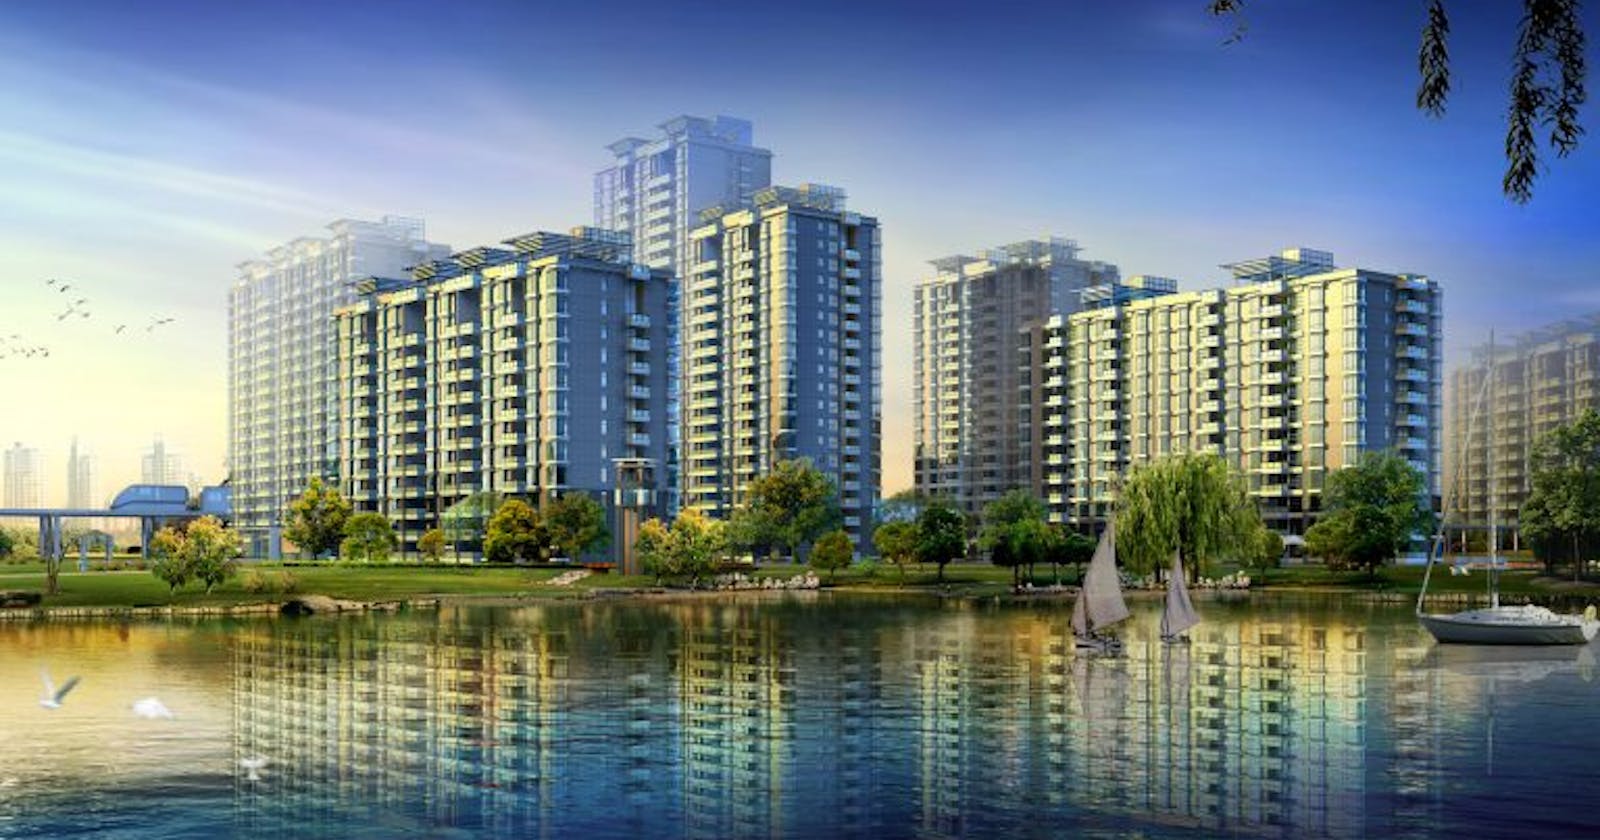 Provident Ecopolitan promises a premium residential experience for those seeking luxury apartments